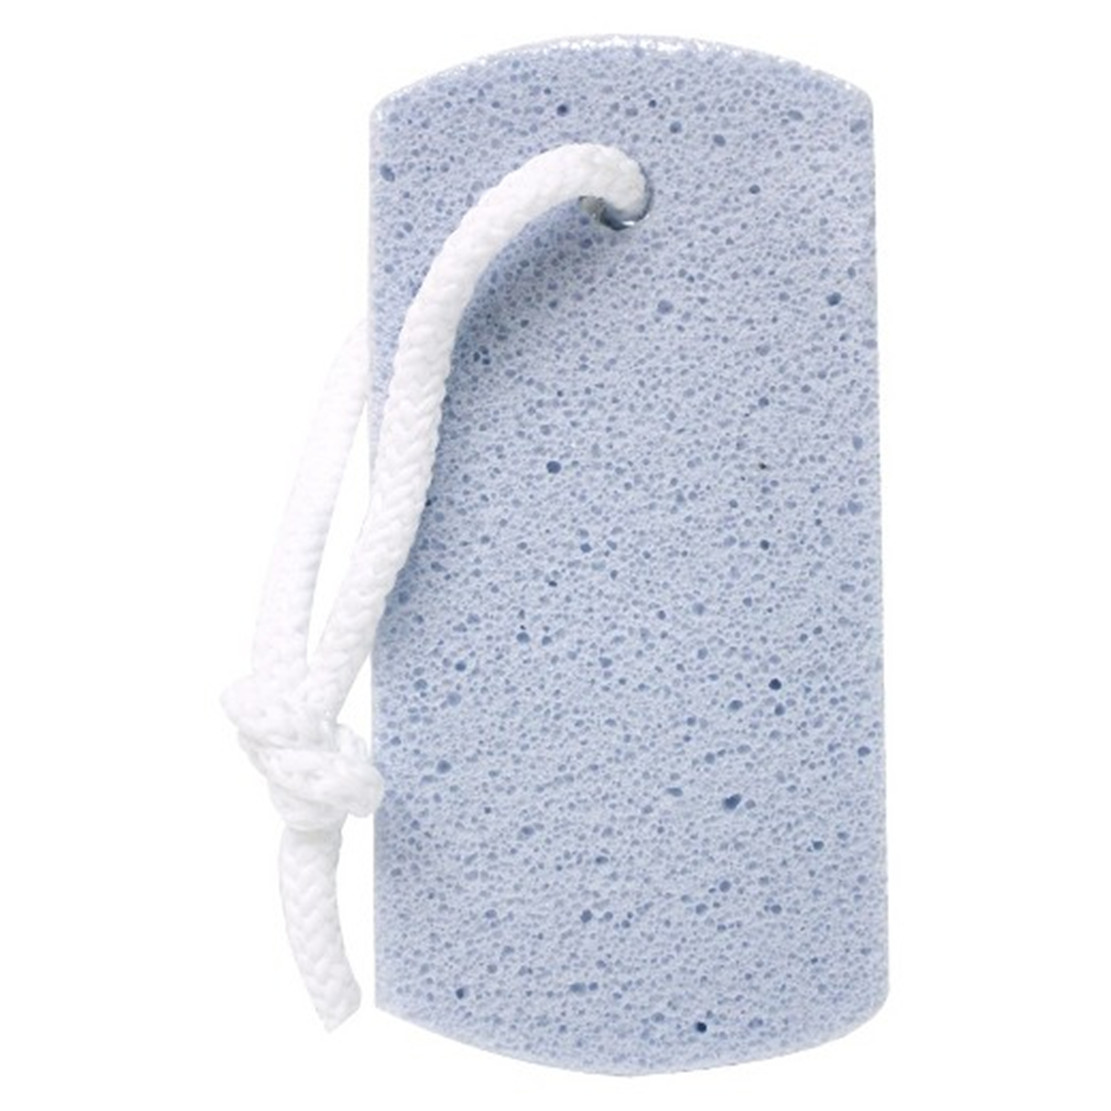 Lava Foot Scrubber Pumice Stone for Feet and Hands